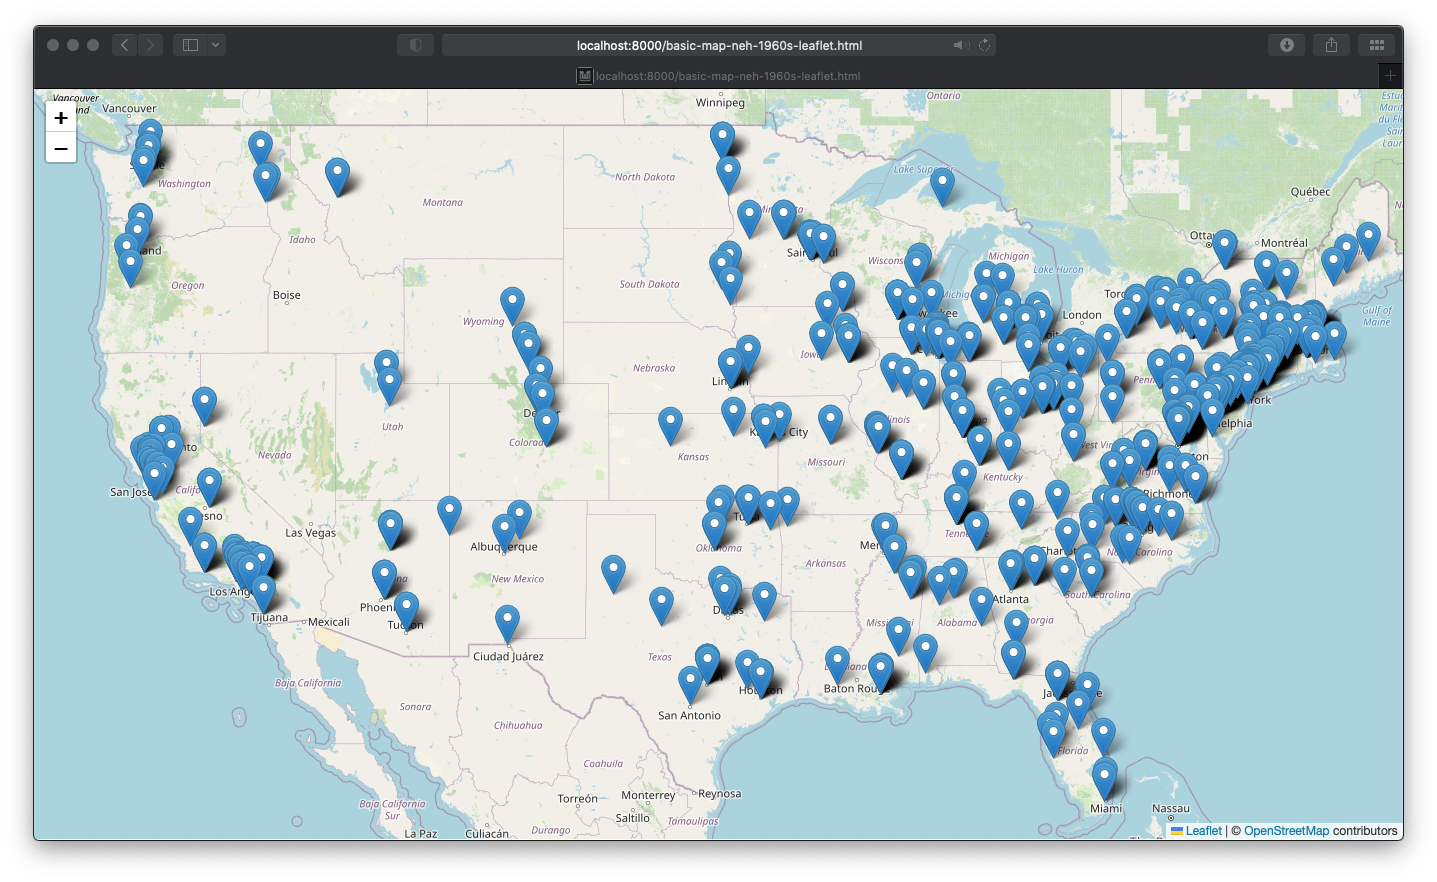 Screenshot image of how the basic map of the 1960s NEH grant data will be displayed by leaflet in an interactive web map